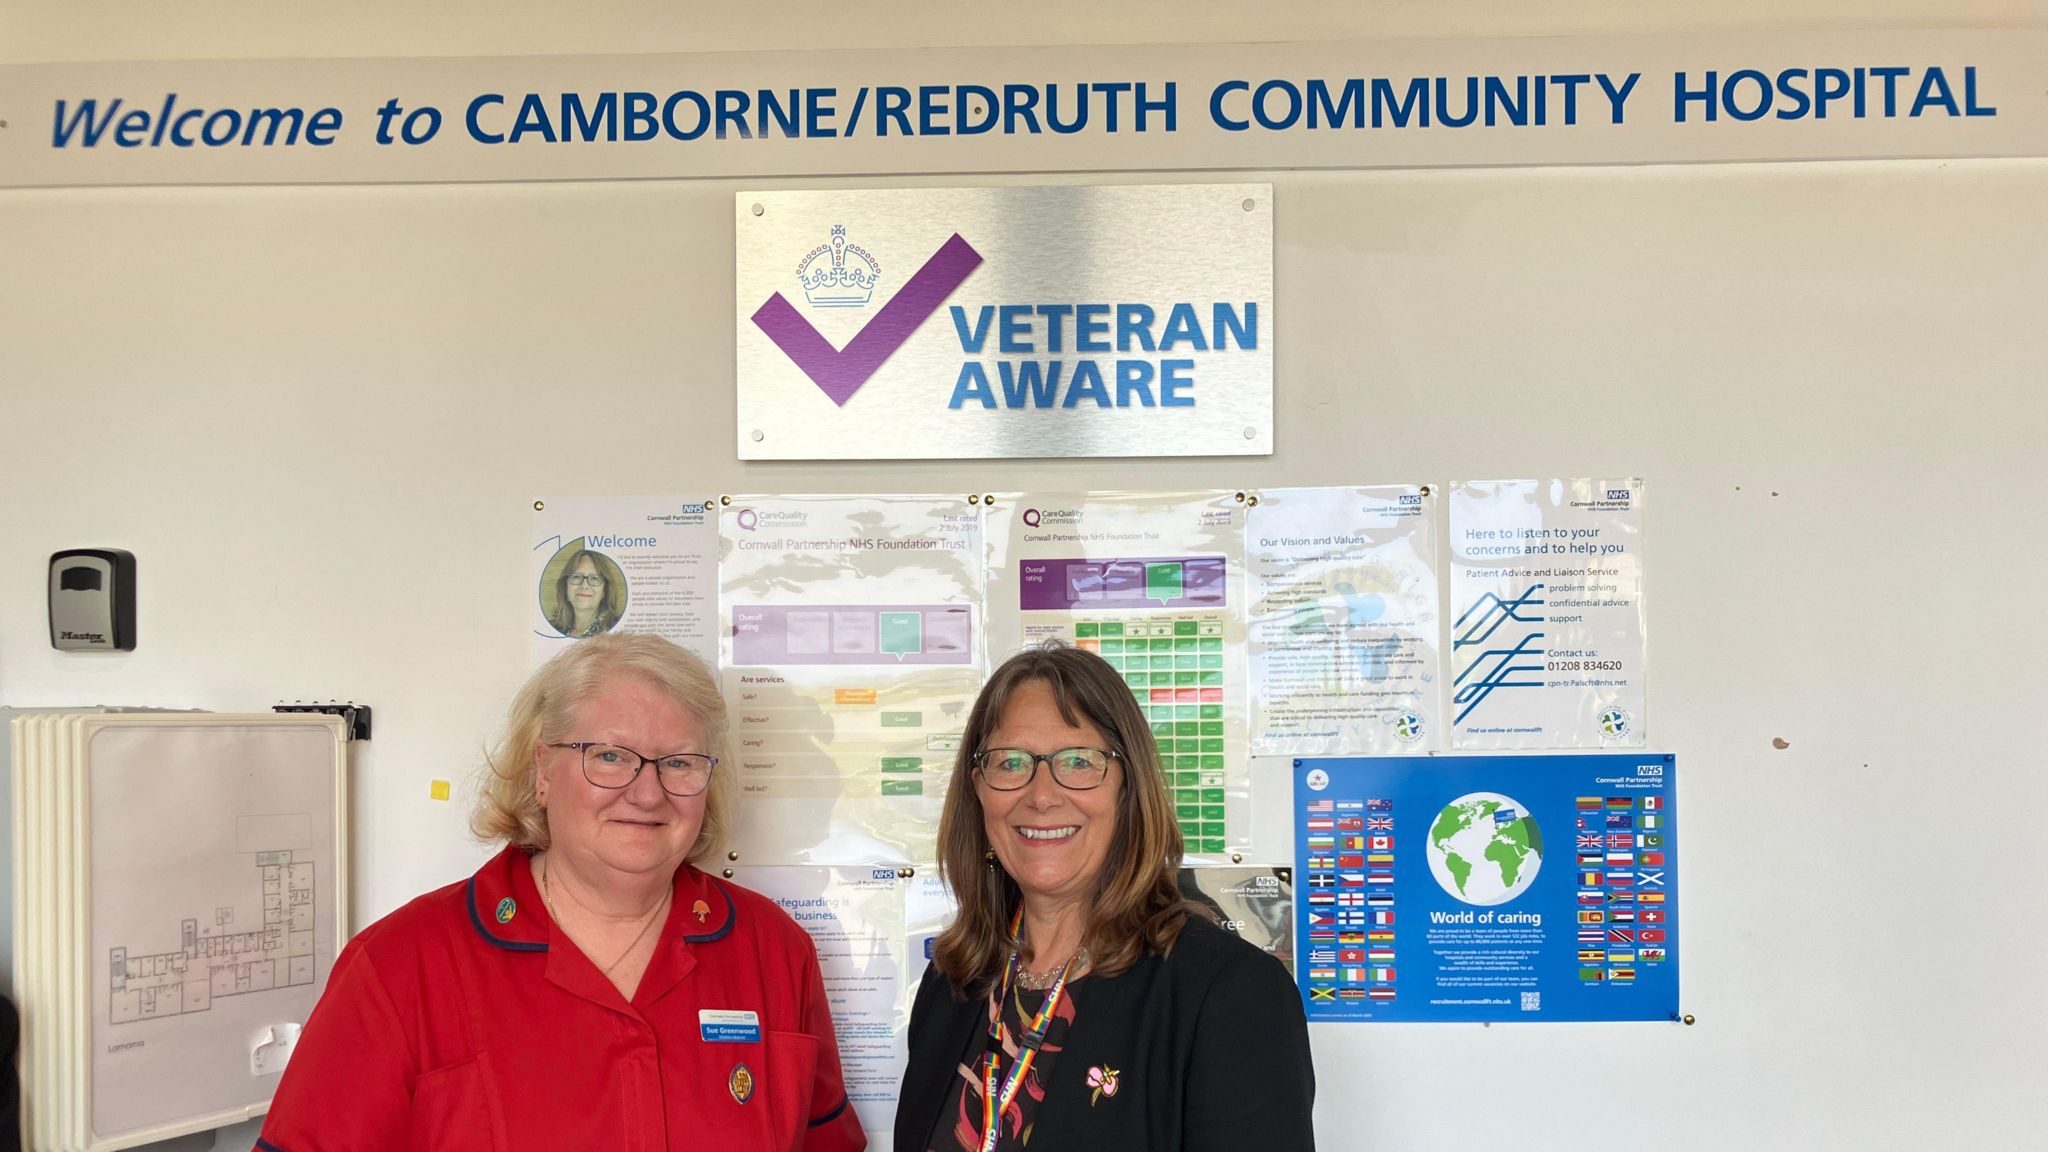 Sue Greenwood, Matron of Camborne Redruth Community Hospital and Debbie Richards, Chief Executive of Cornwall Partnership NHS Foundation Trust standing below the new Veteran Aware plaque